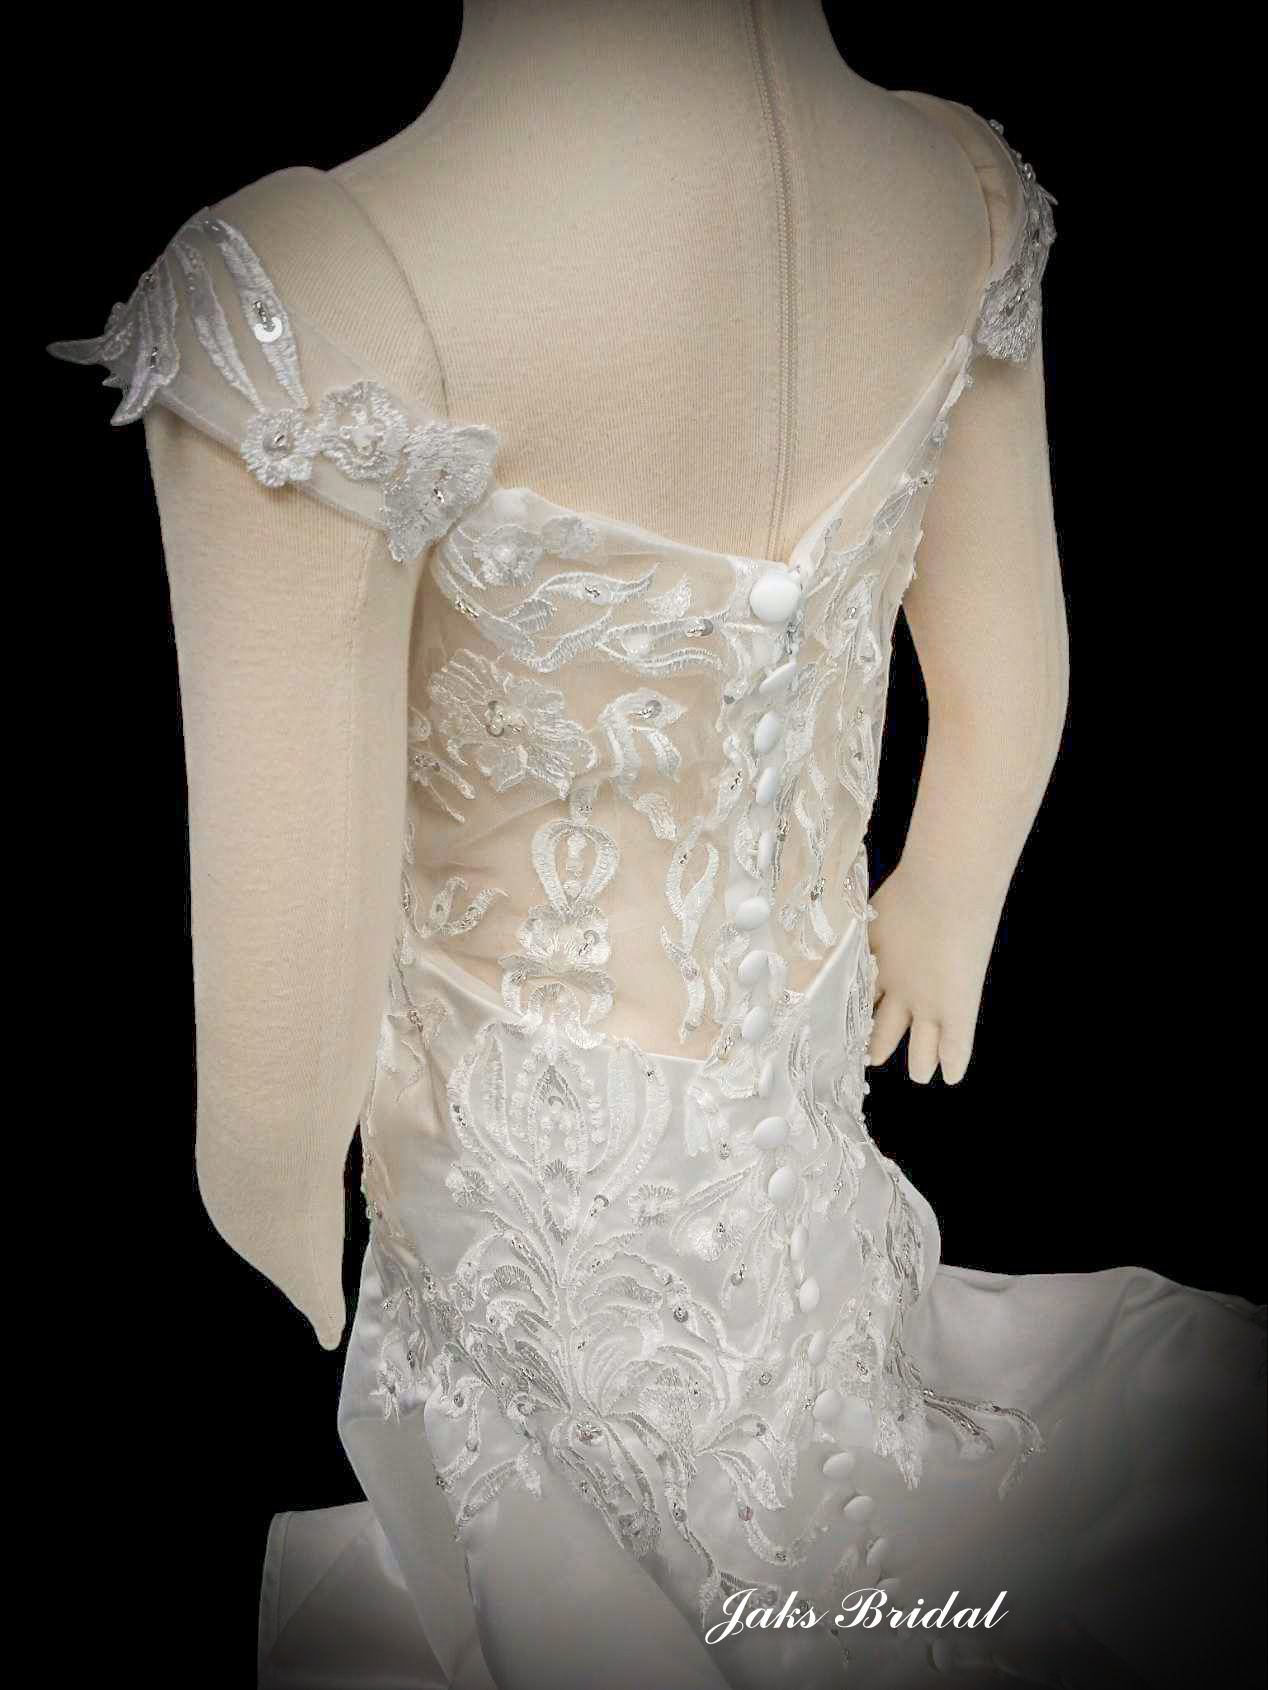 The dress has lace appliqued cap sleeves that sit at your shoulders and lead down to a deep illusion back. 